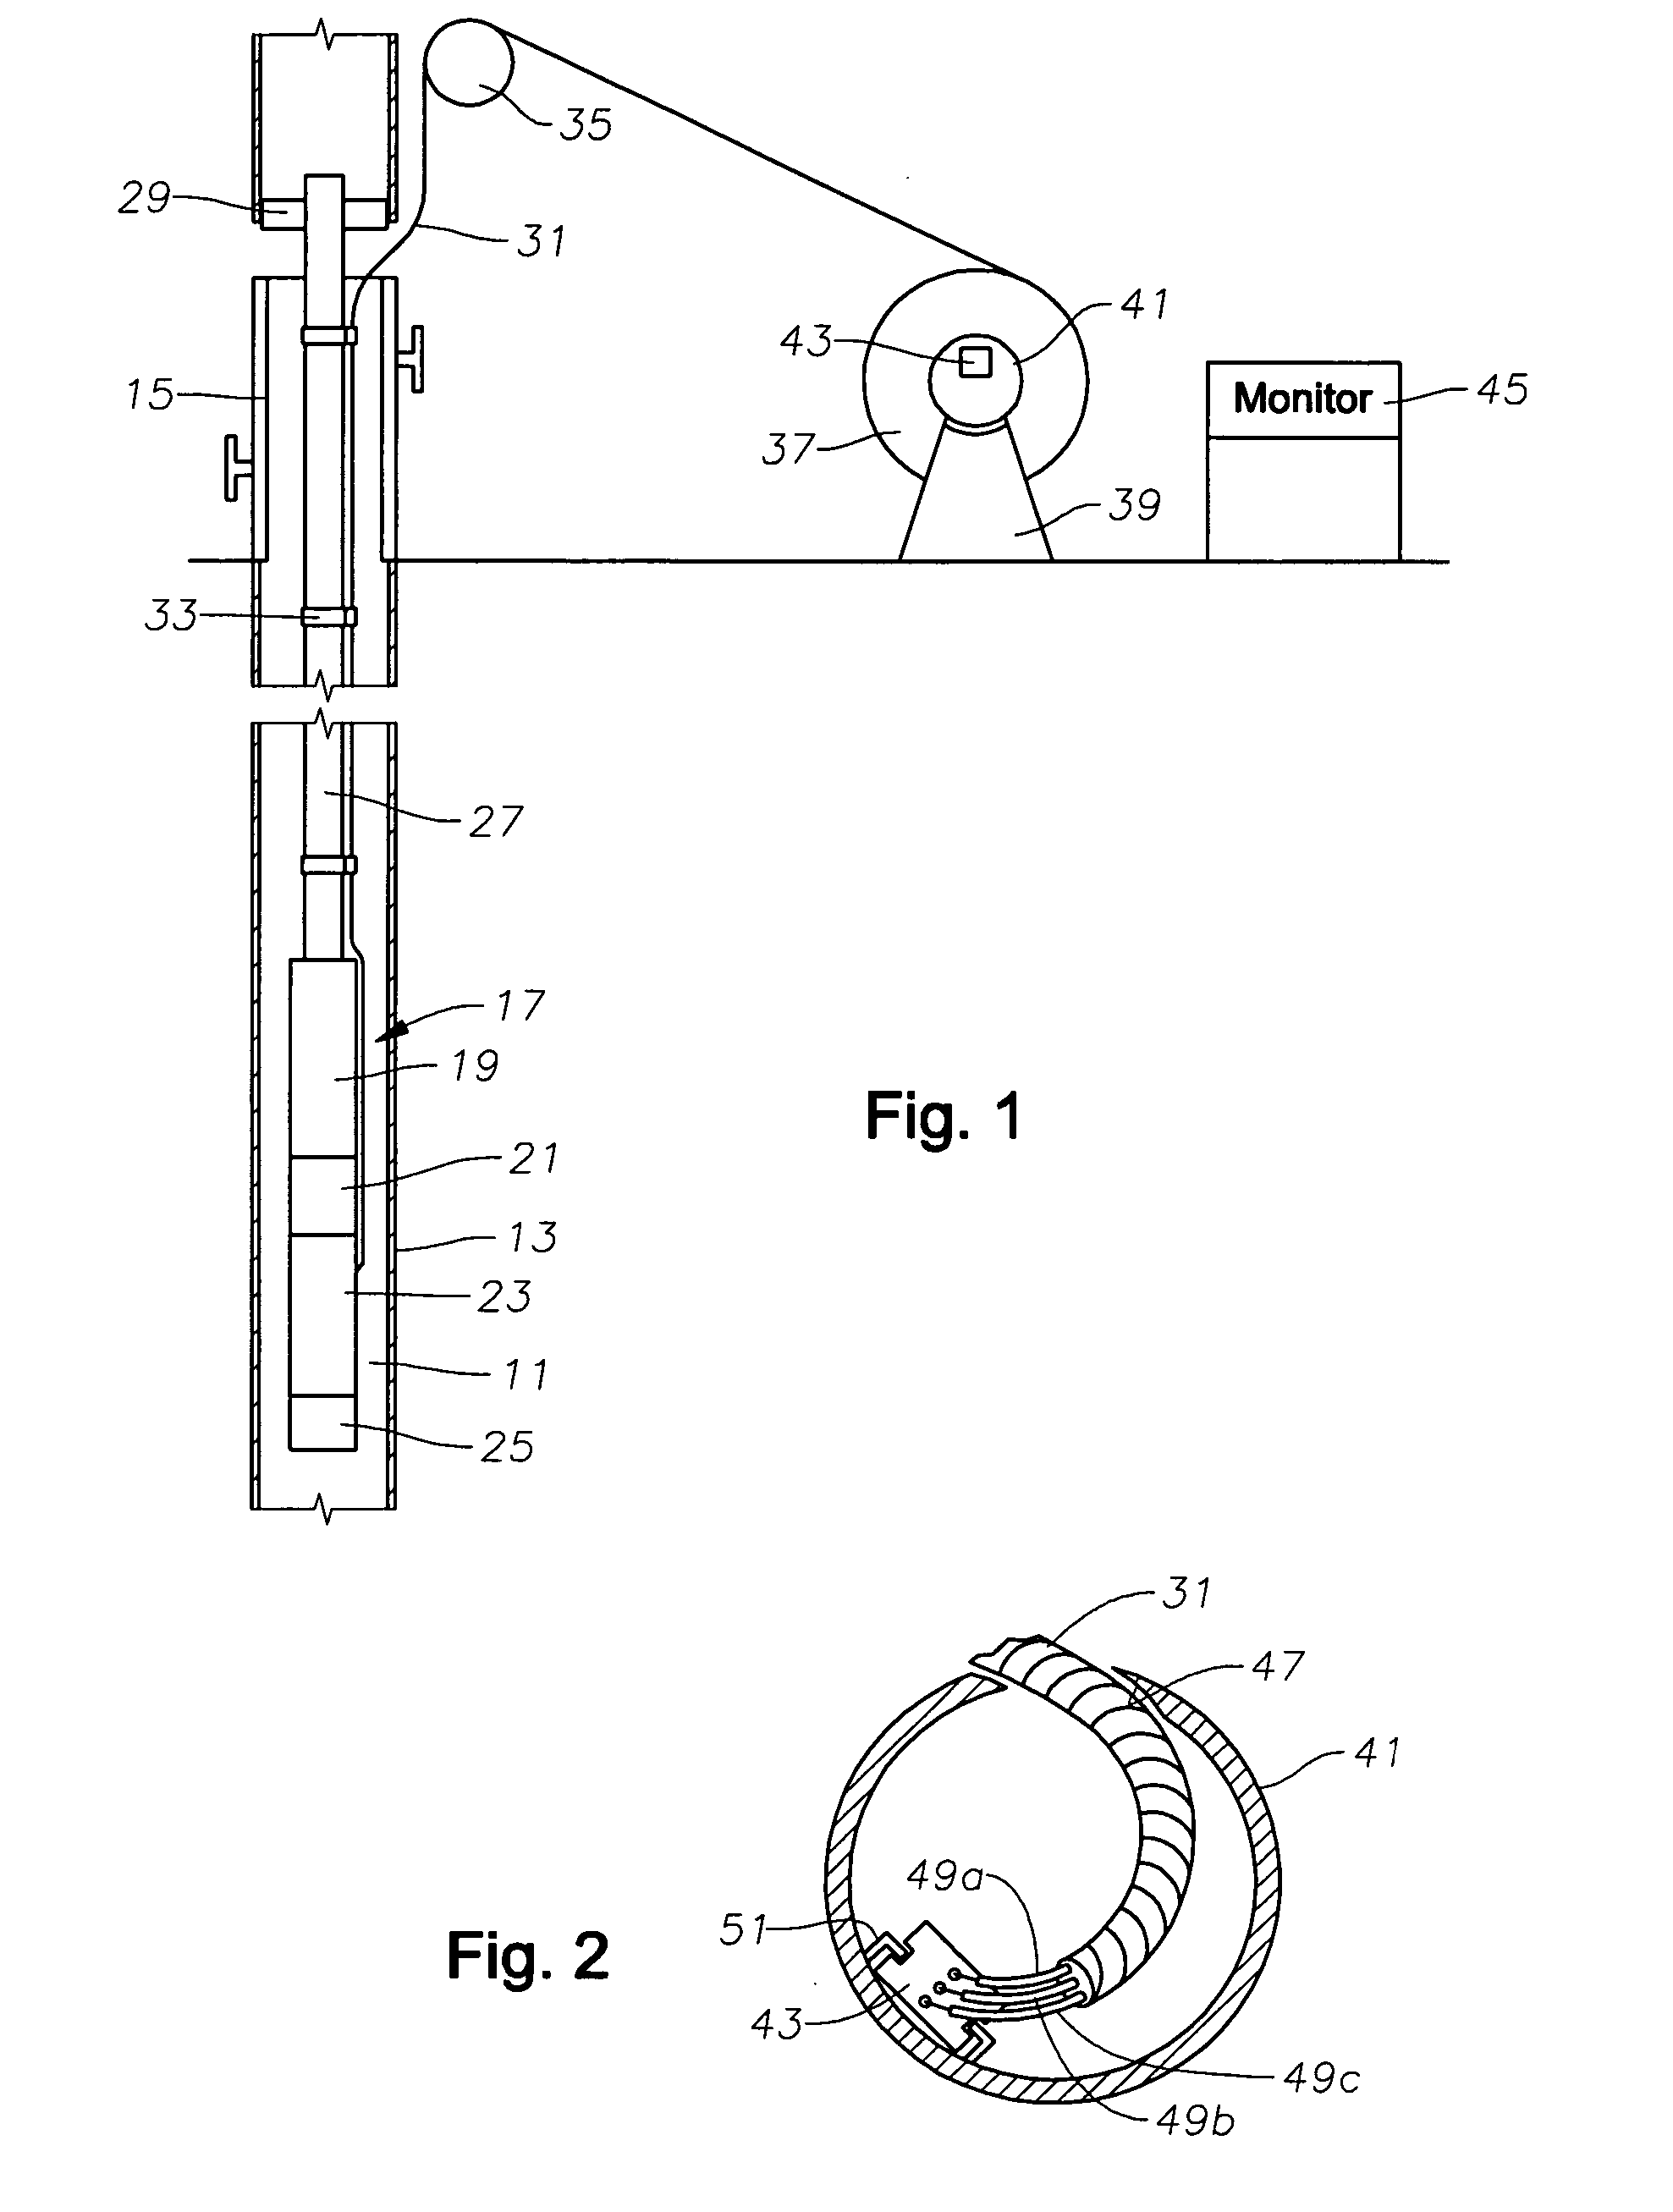 Method for installing well completion equipment while monitoring electrical integrity